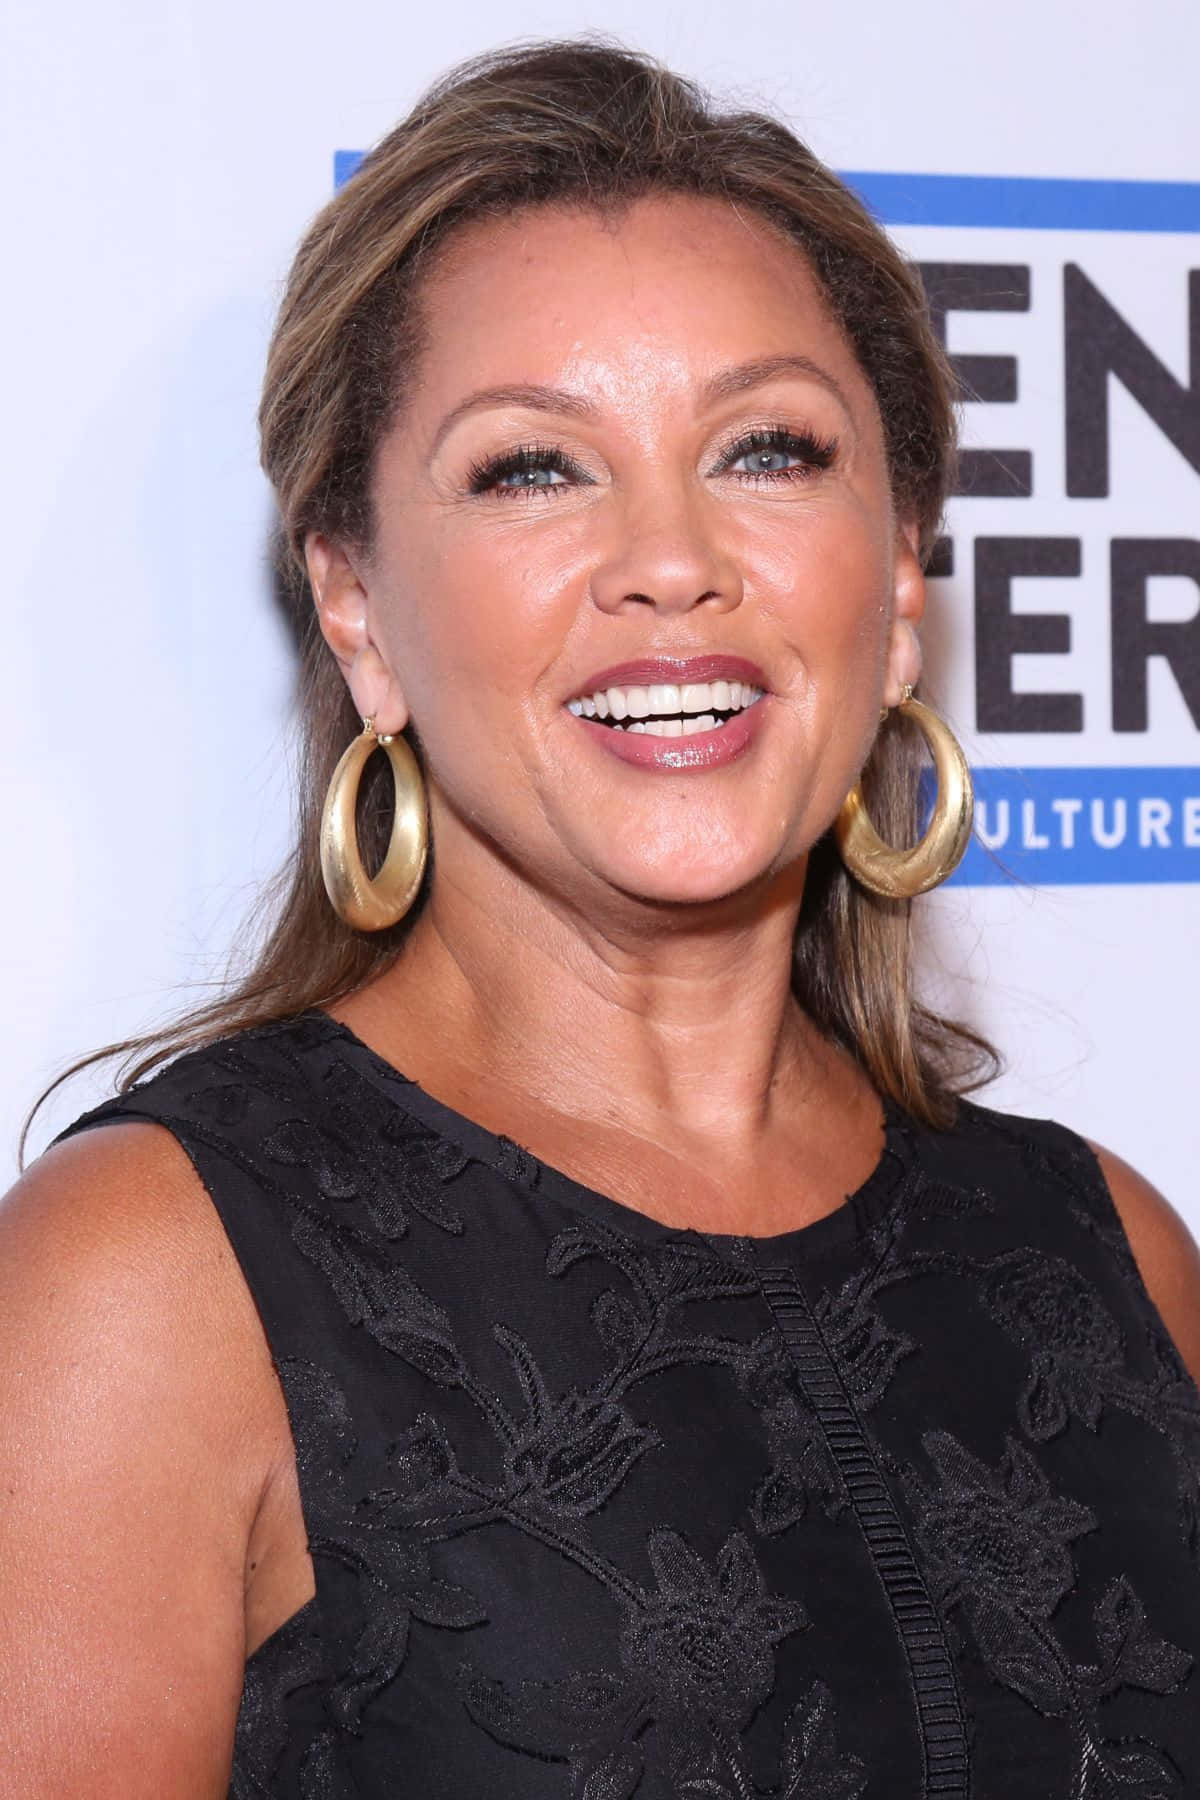 Vanessa Williams looking confident and beautiful